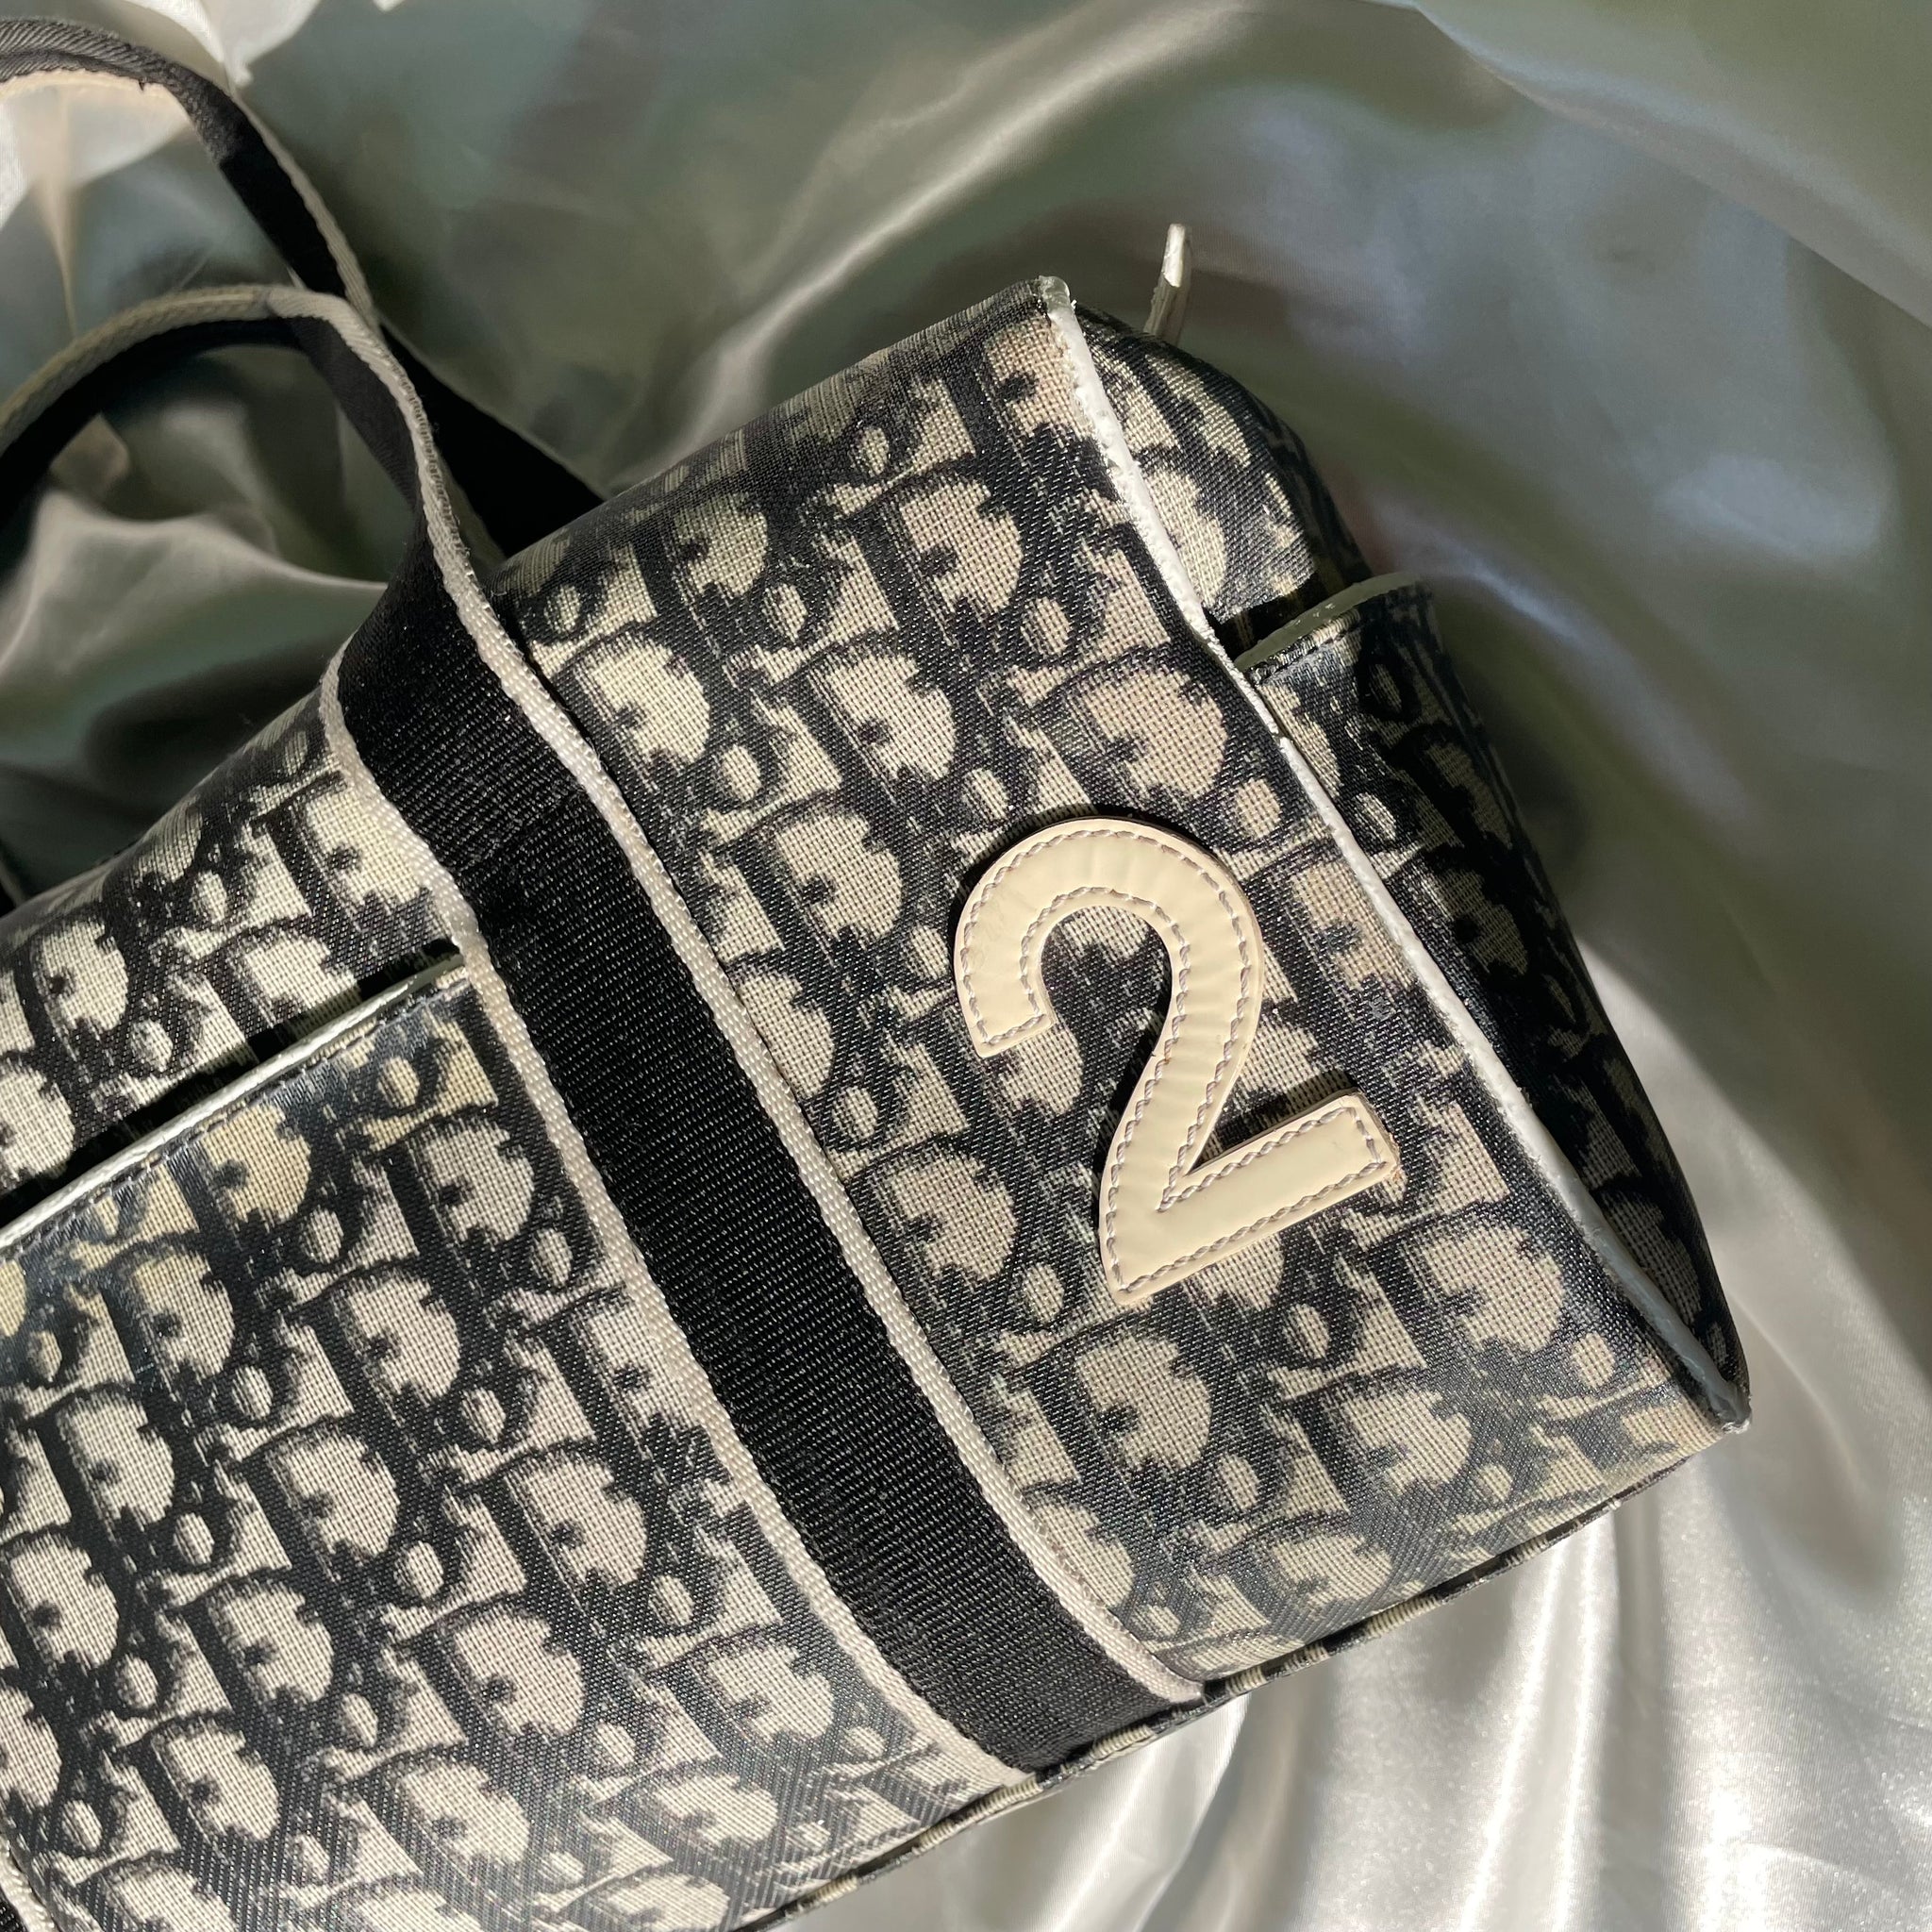 Dior Trotter – The Brand Collector